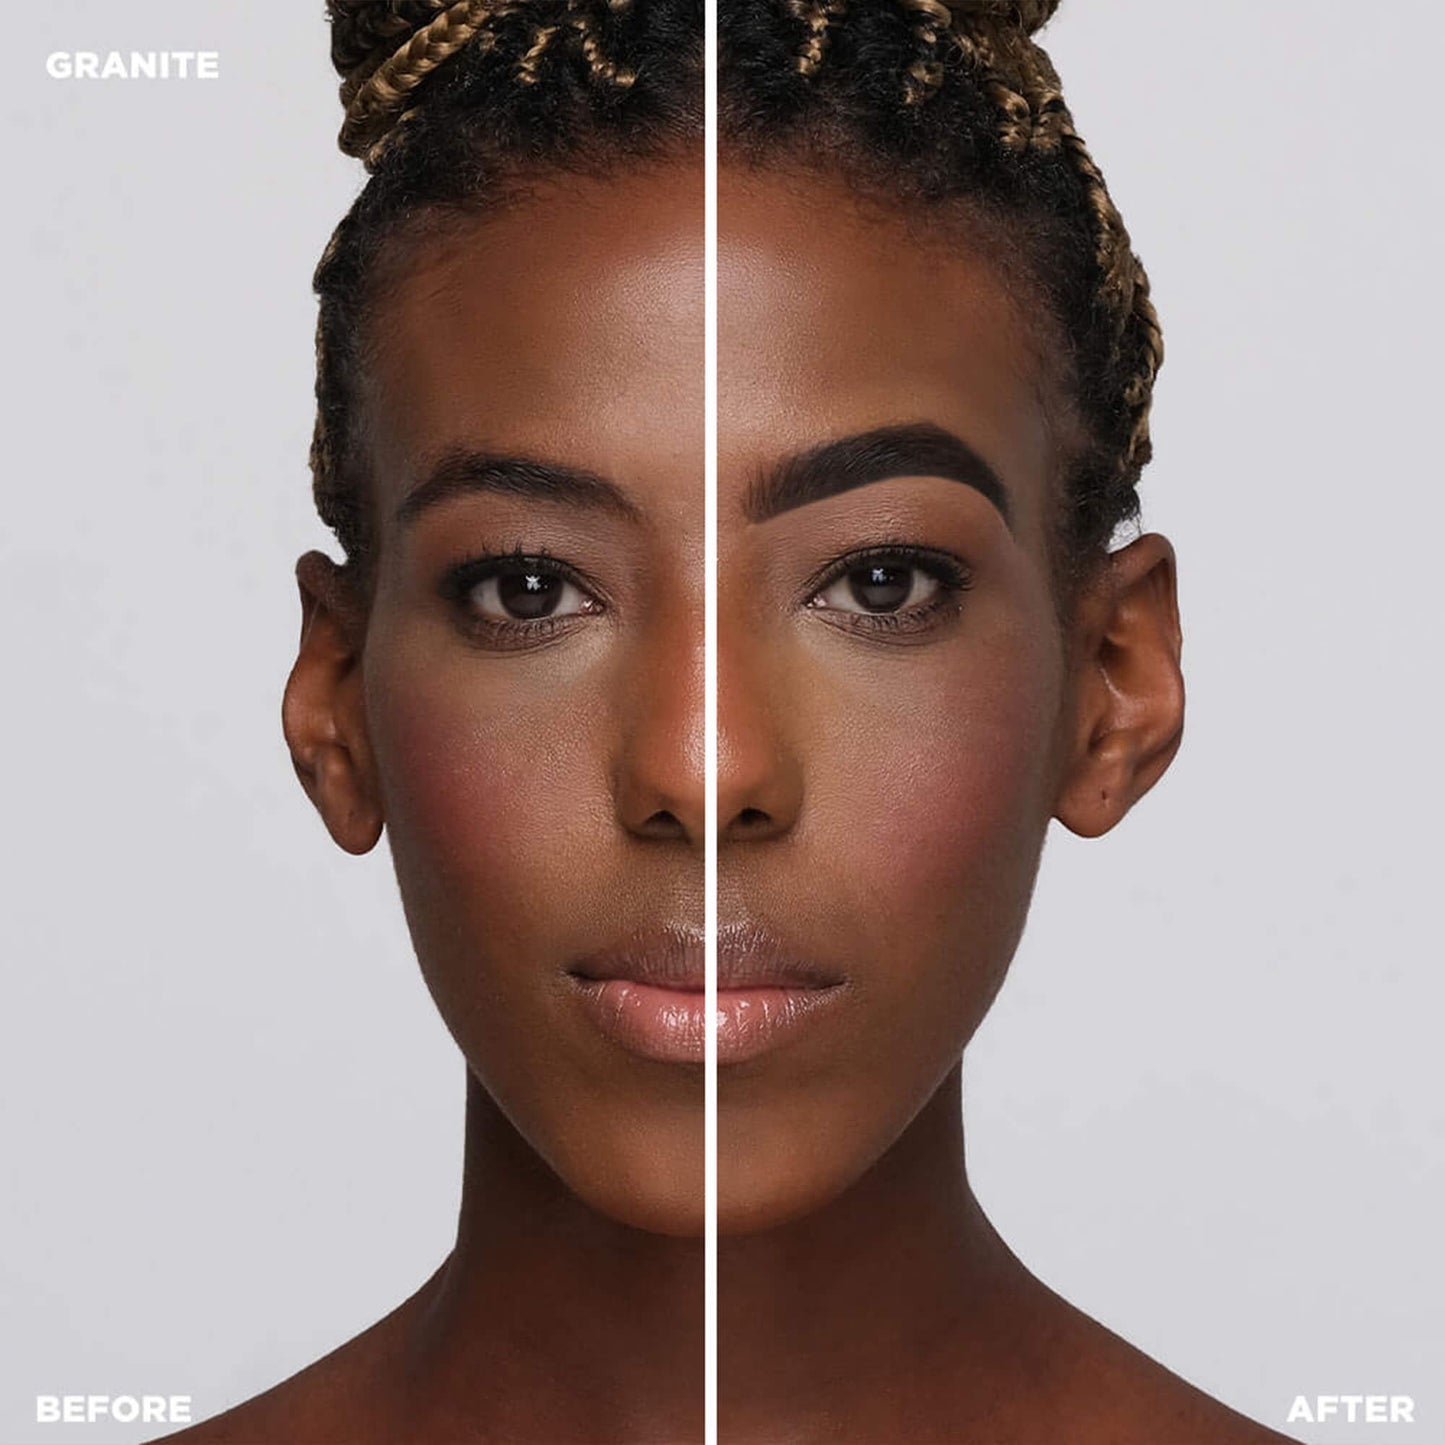 Before and after shot of model wearing Color-Granite - Black